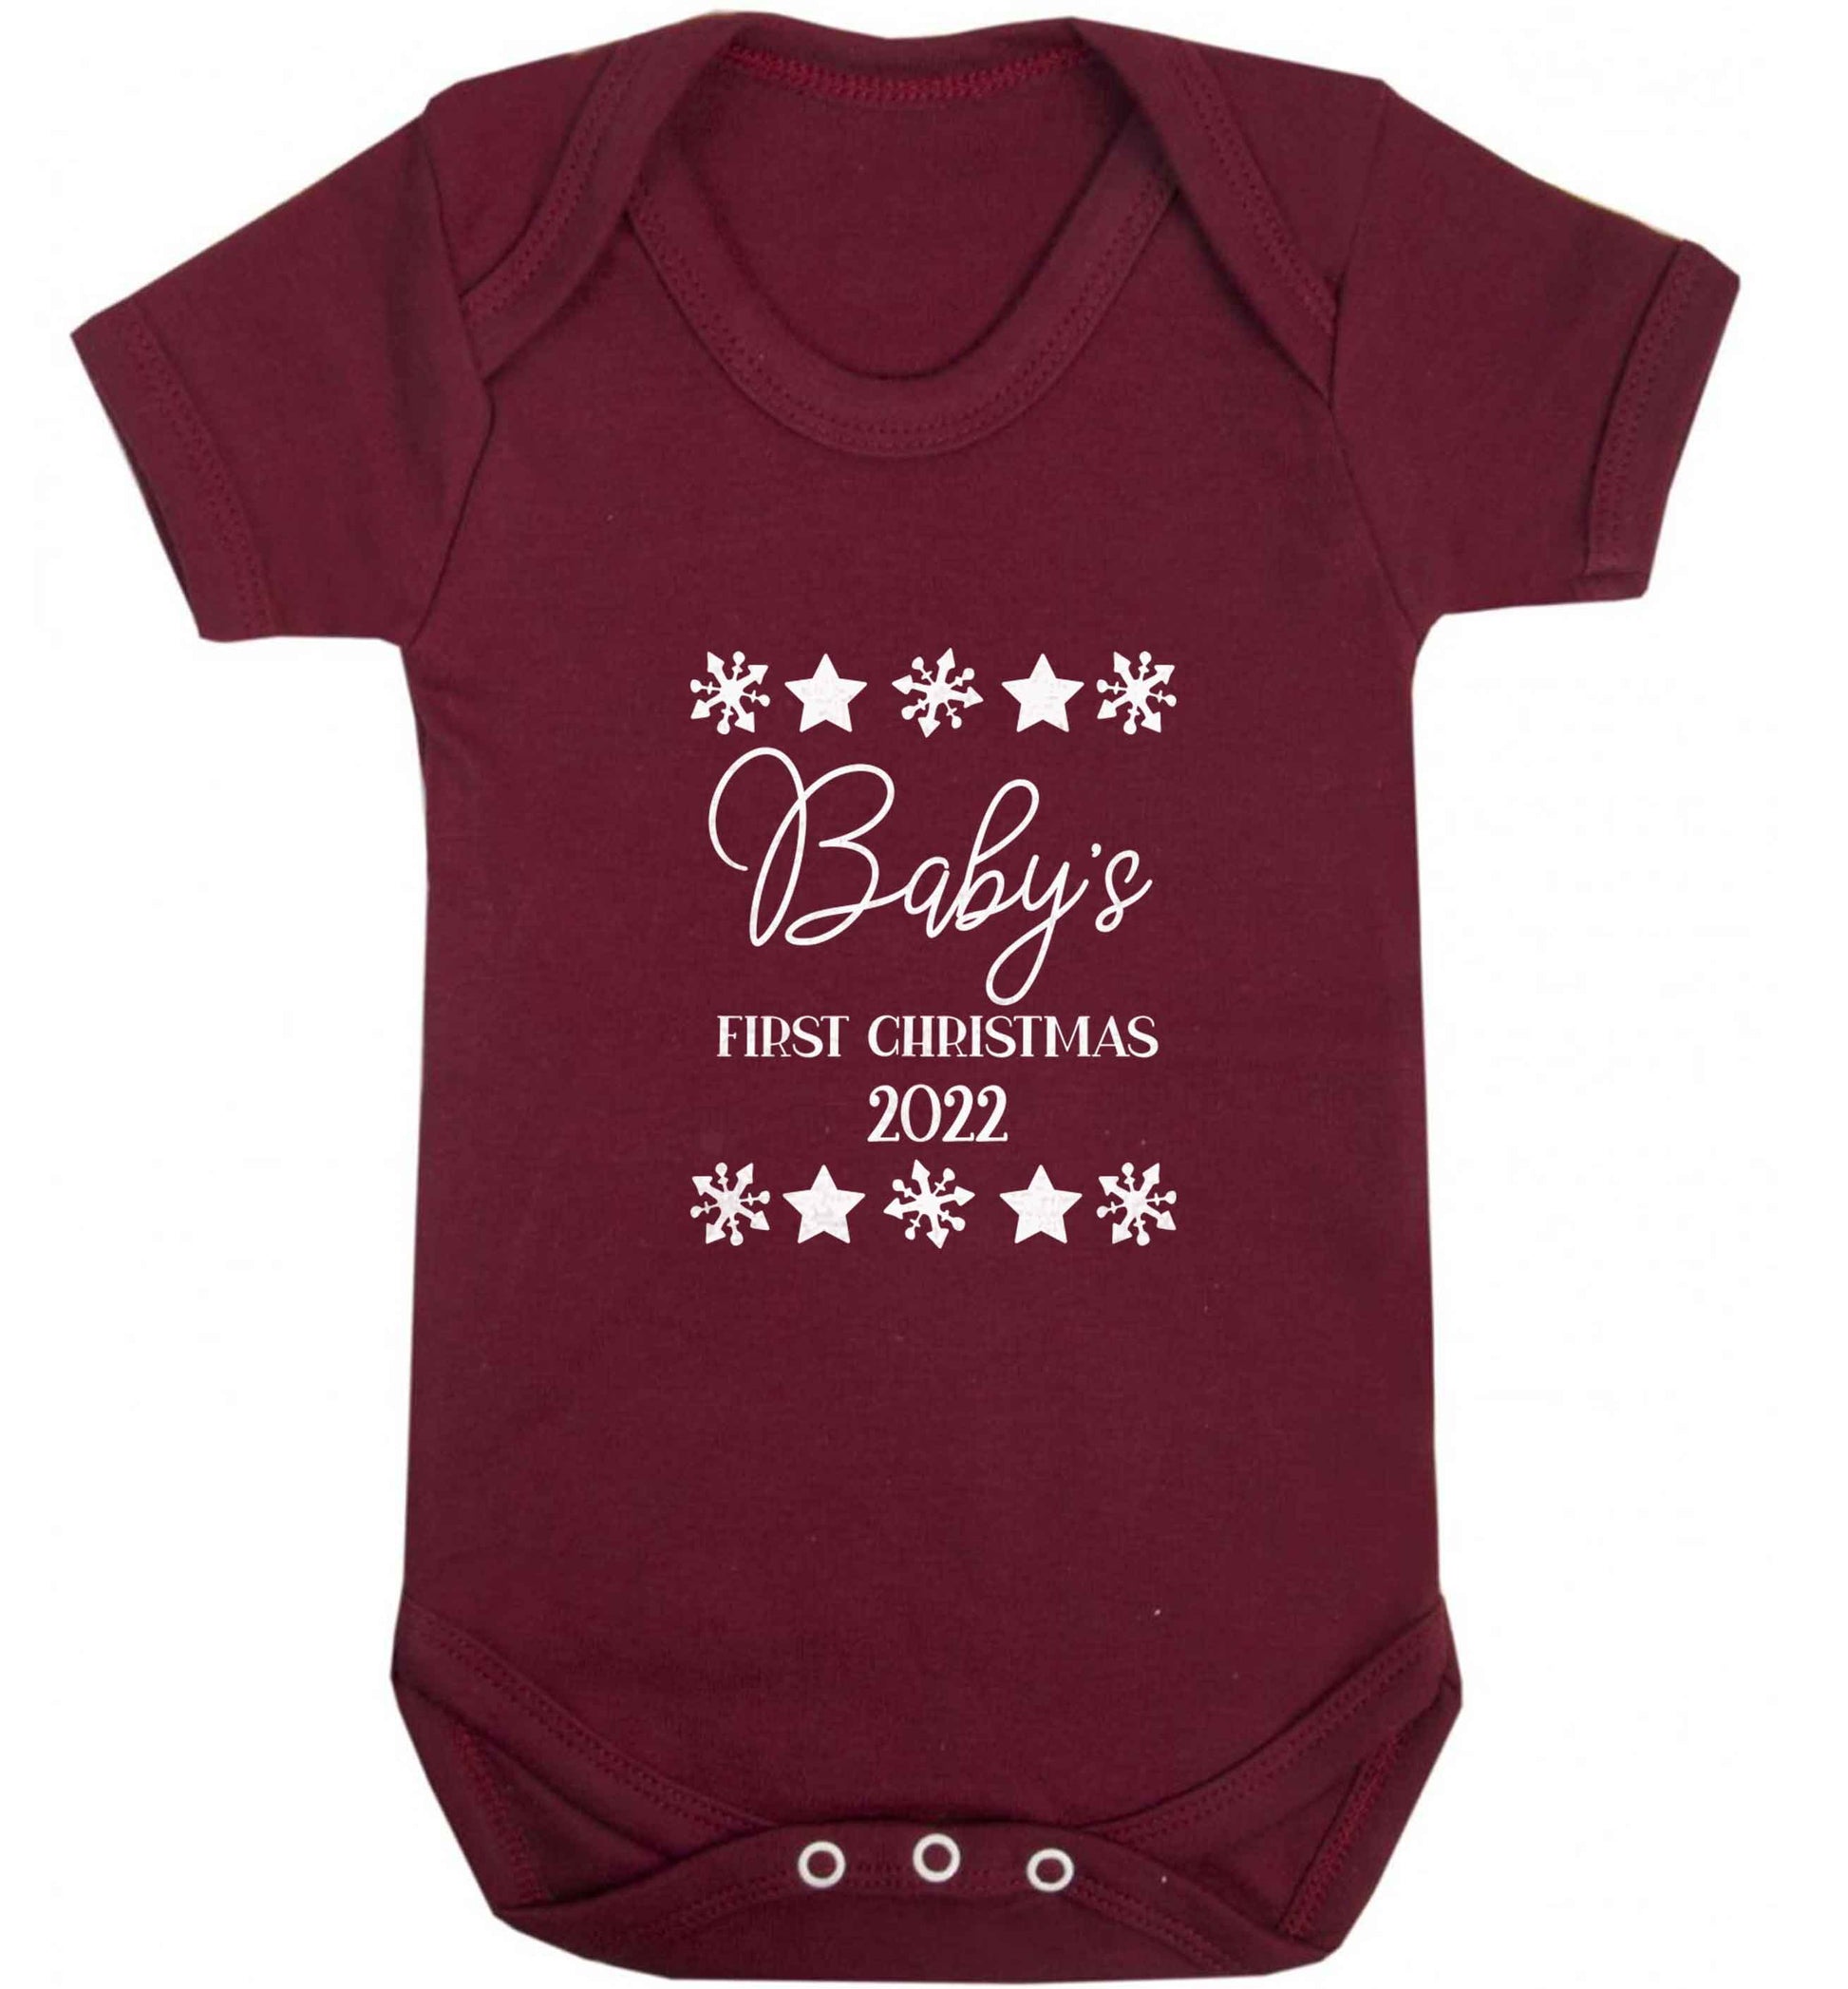 Baby's first Christmas baby vest maroon 18-24 months